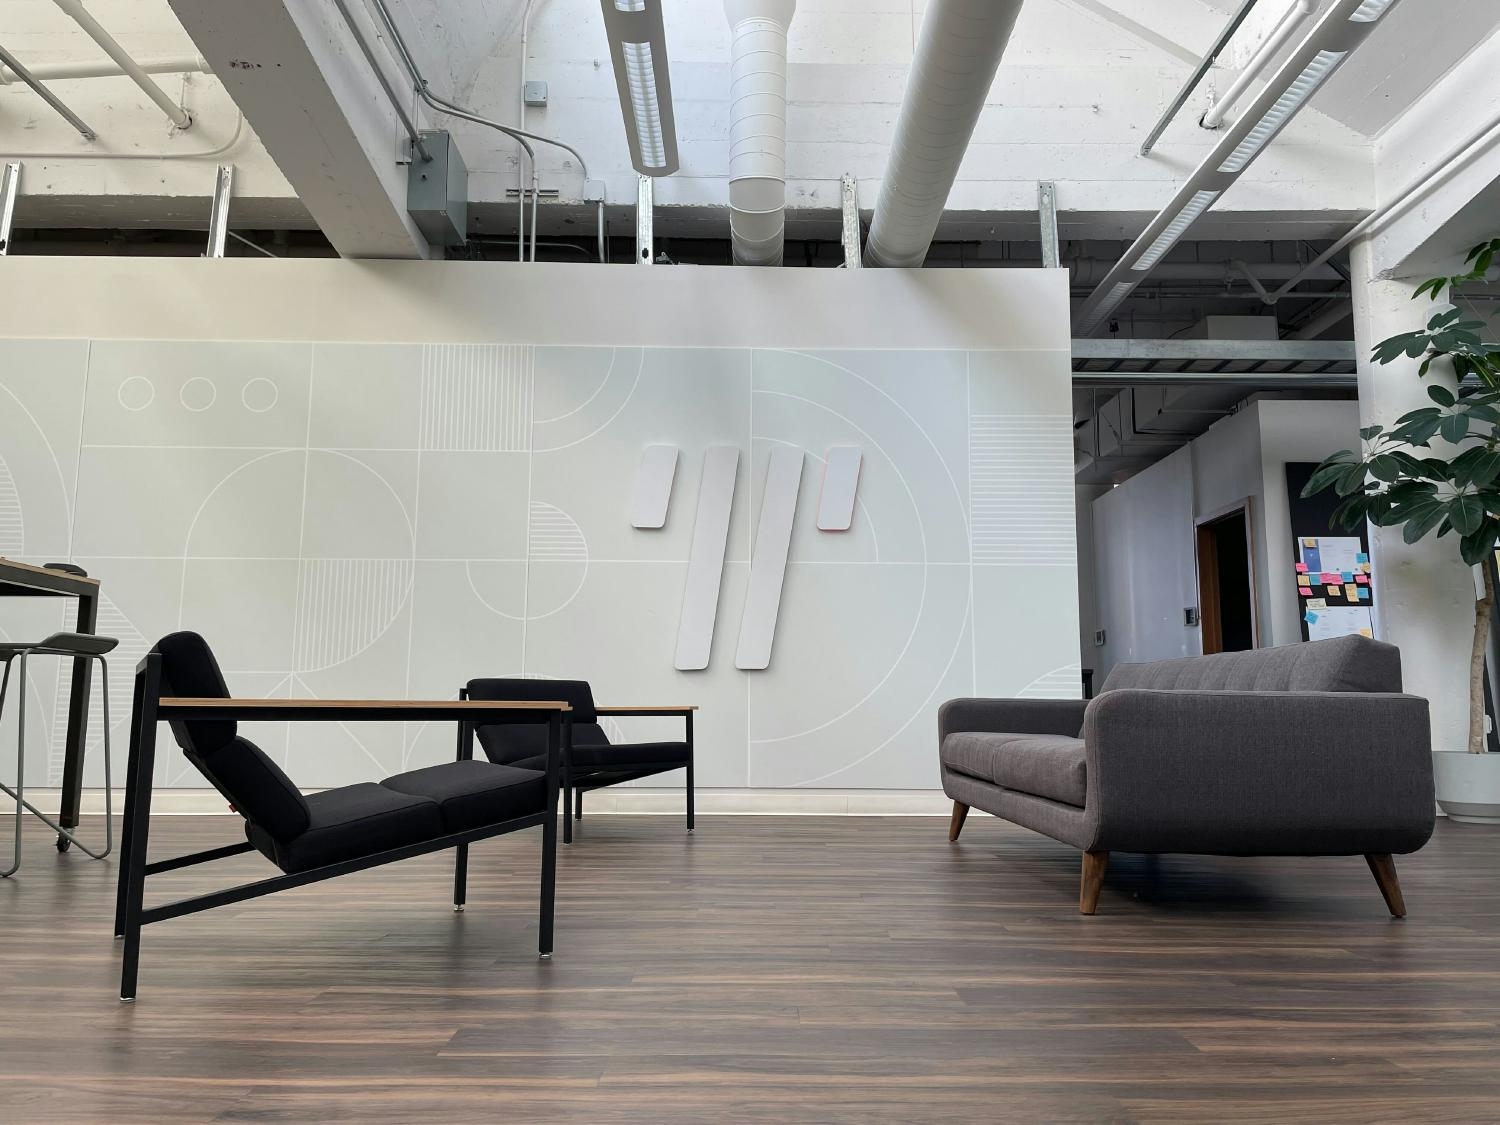 Our San Francisco office provides plenty of communal spaces for collaboration and gatherings to build connections. 